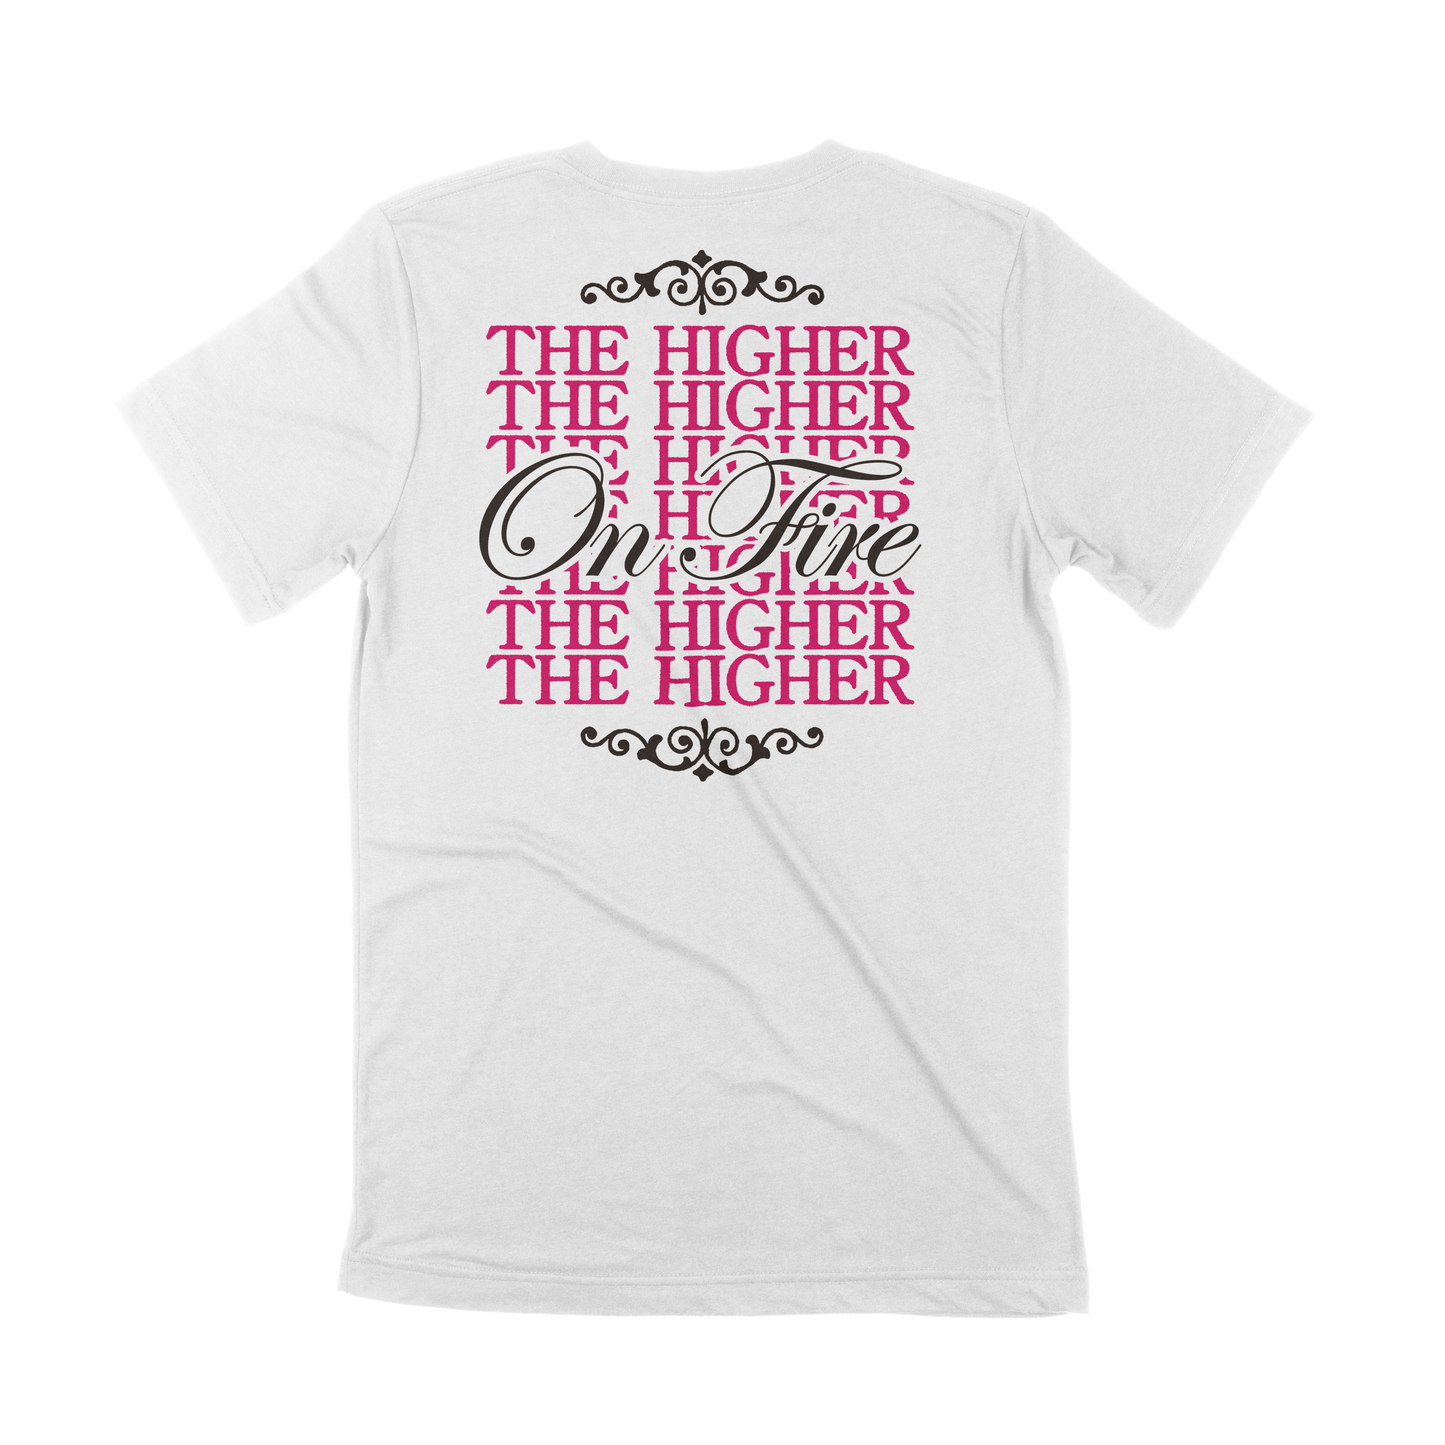 The Higher - "White On Fire" T-Shirt